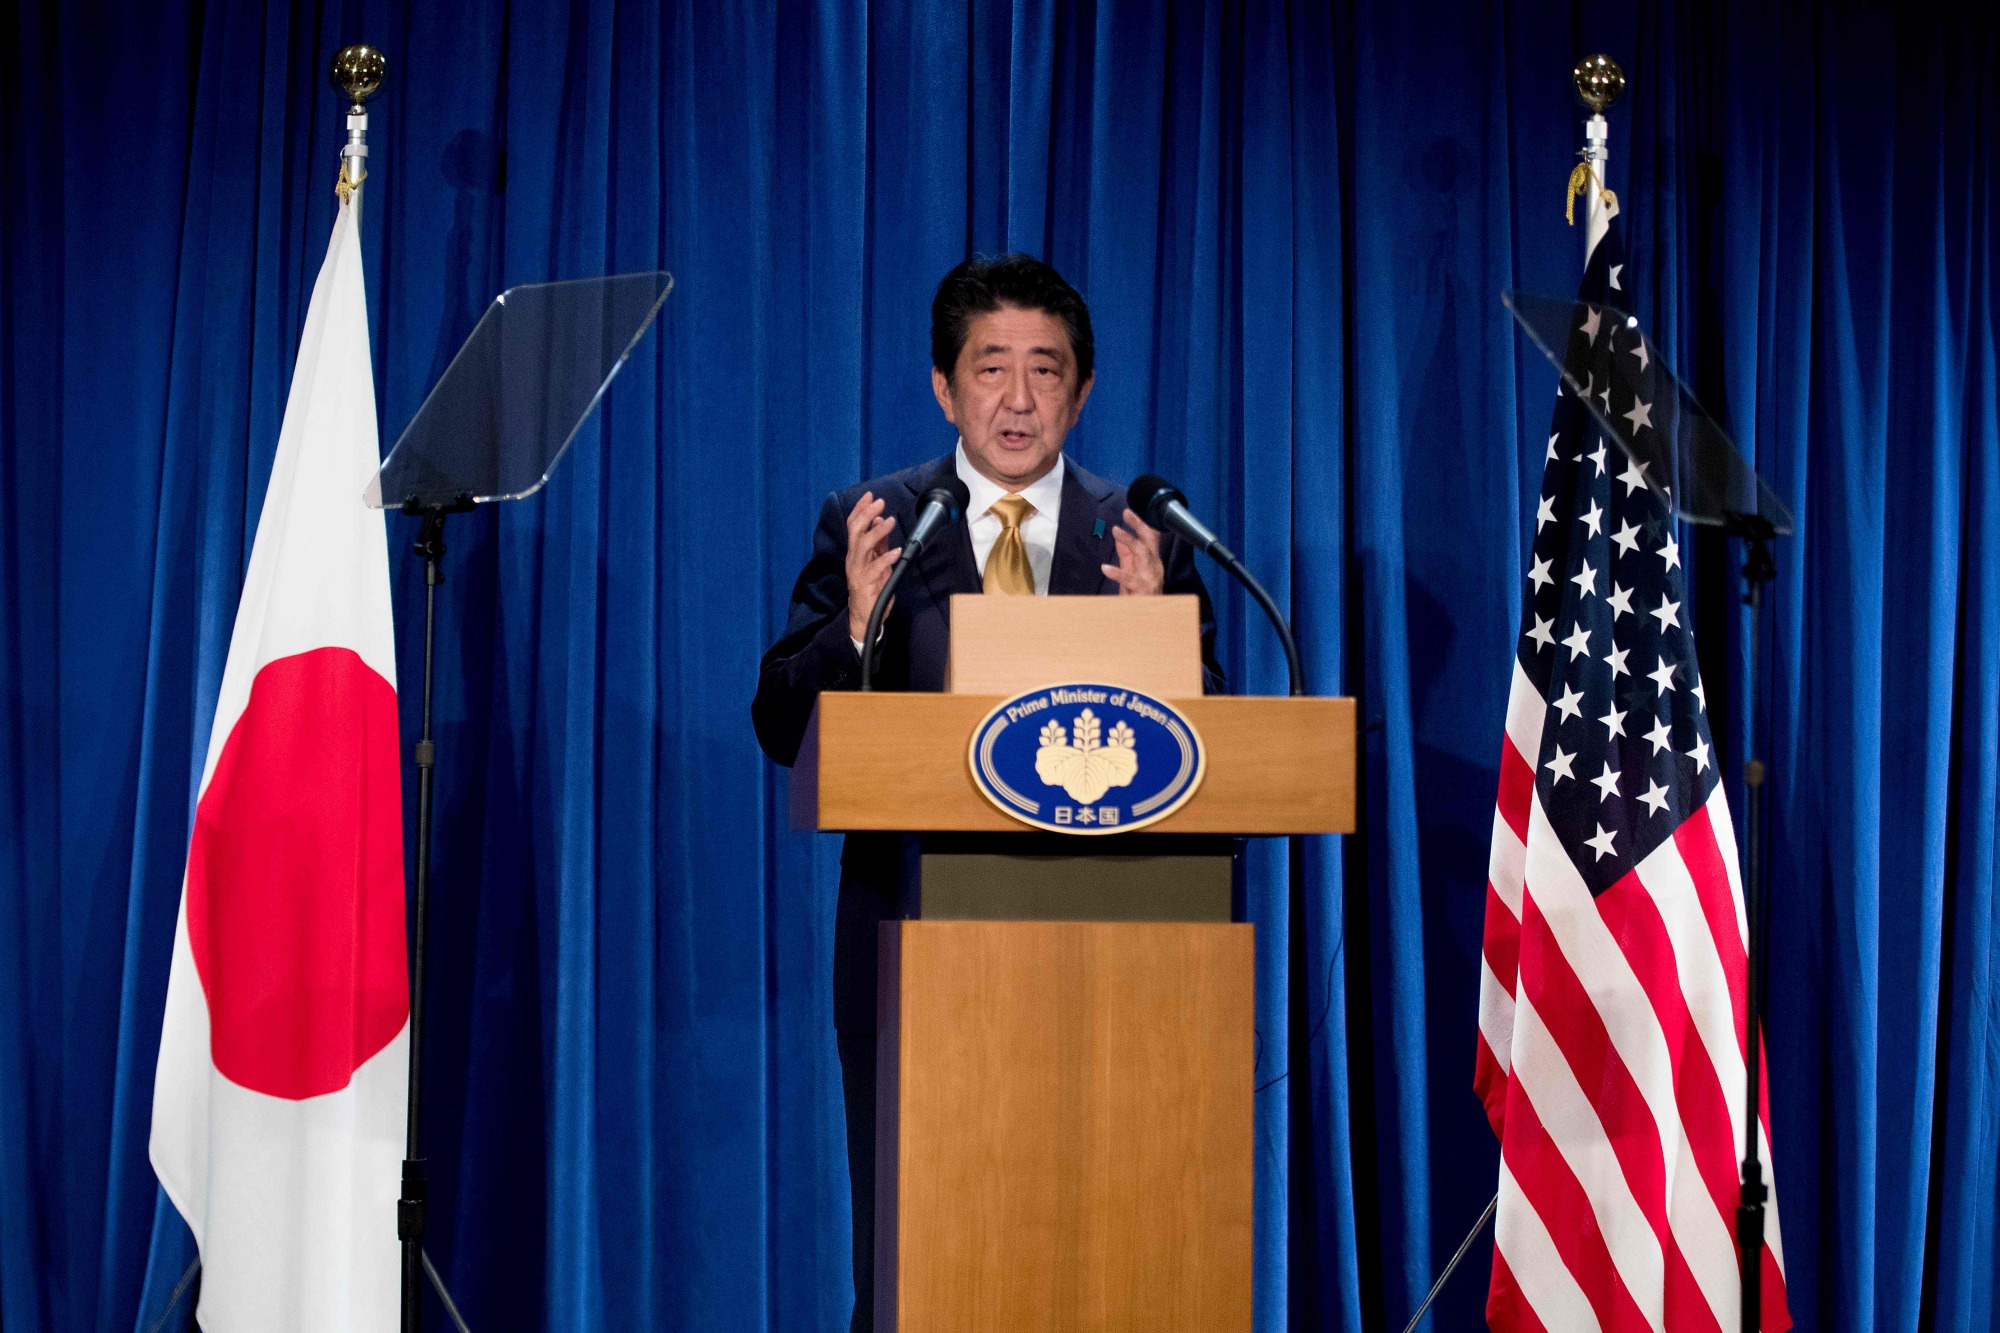 Prime Minister Shinzo Abe speaks during a news conference on the sidelines of the U.N. General Assembly in New York on Wednesday. | AFP-JIJI